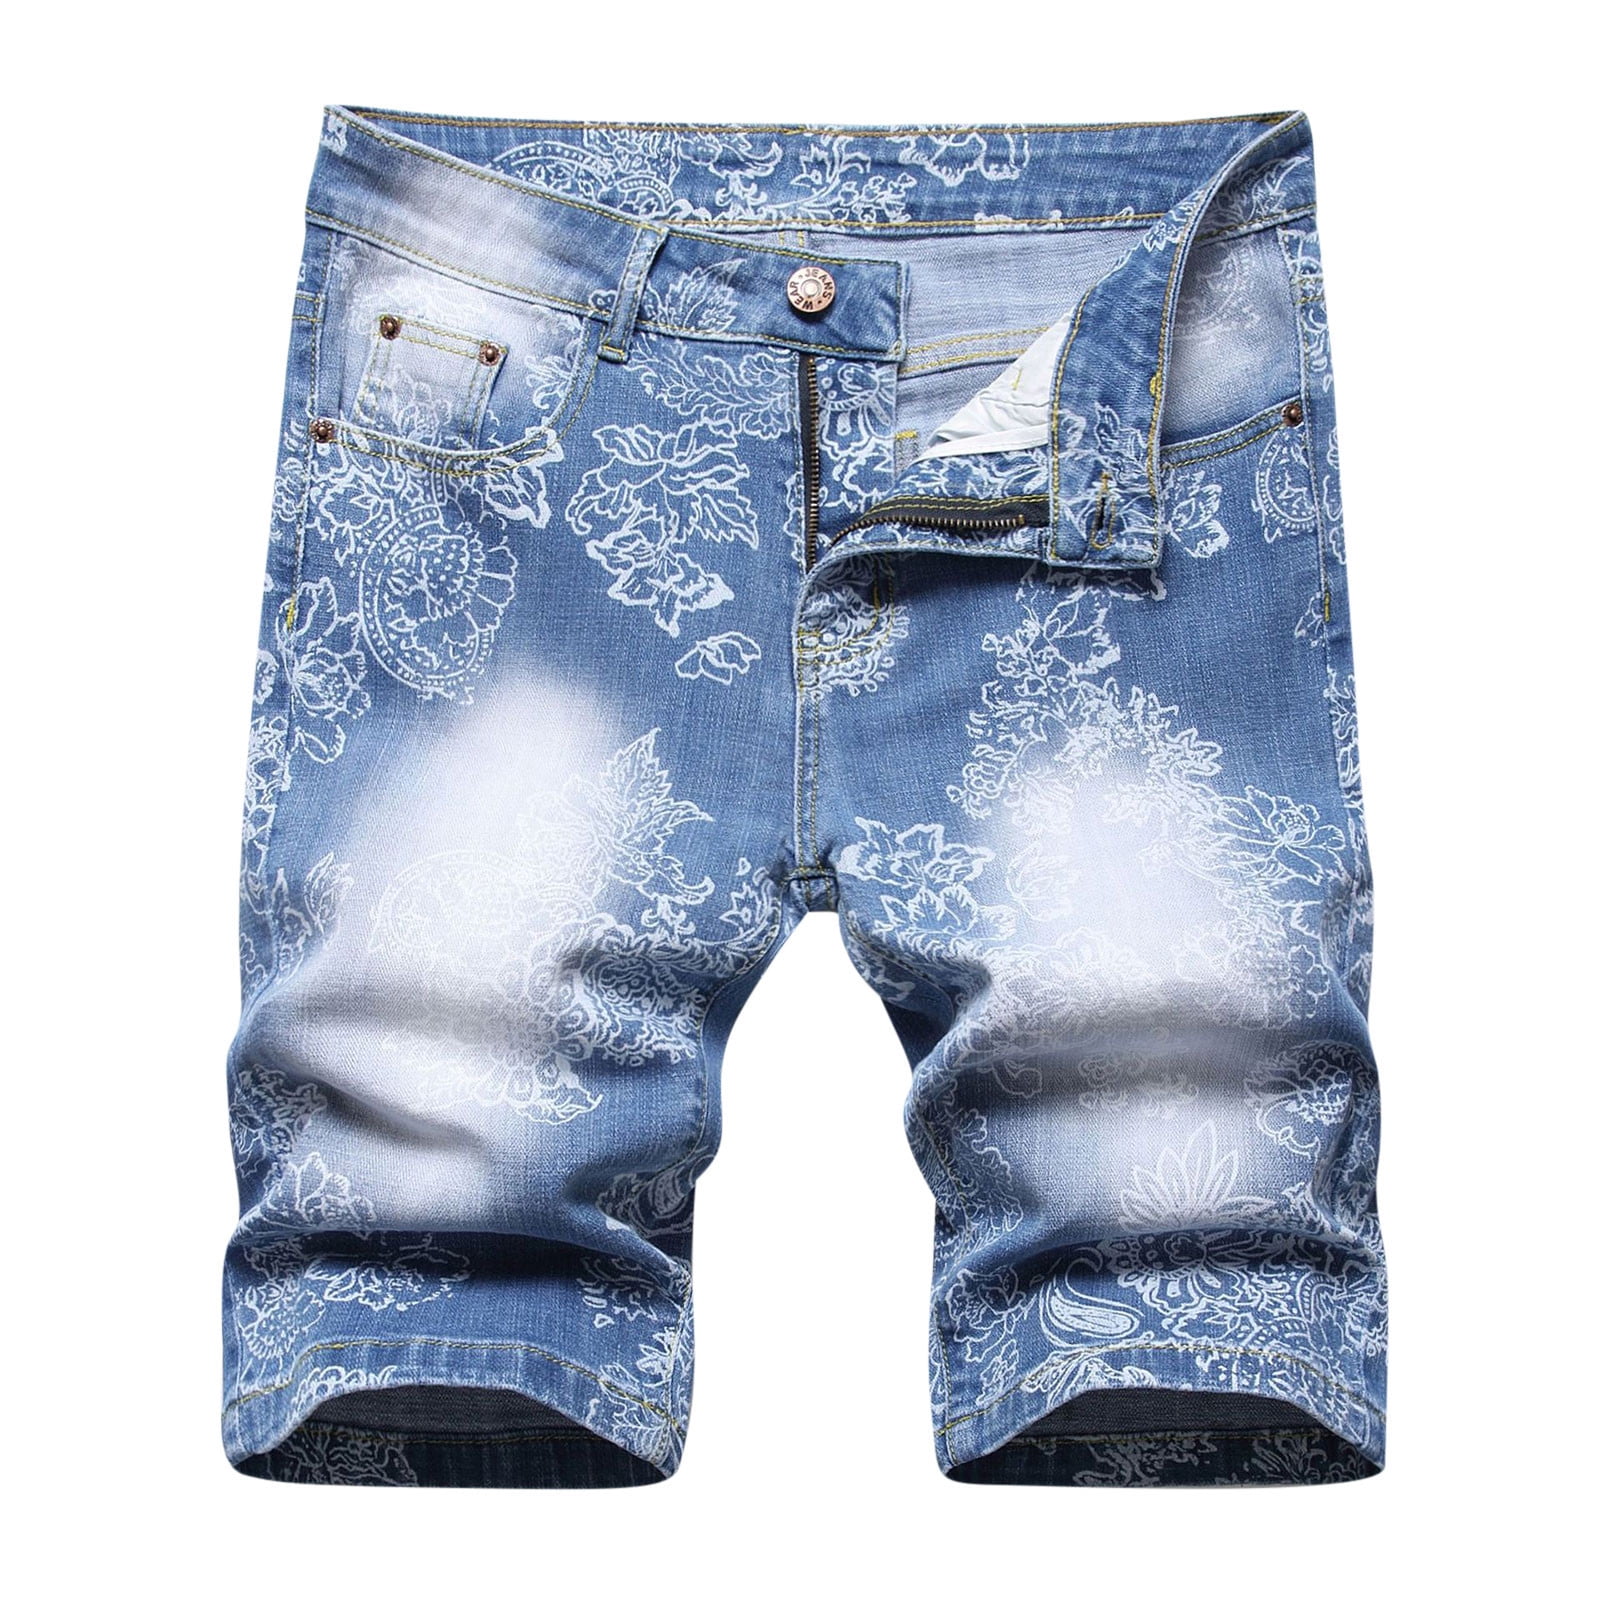 Jeans Denim Shorts Men Solid Ripped Summer Designer Mens Bleached Retro Big  Size Short Pants Trousers 28 42 From Xichat, $24.36 | DHgate.Com